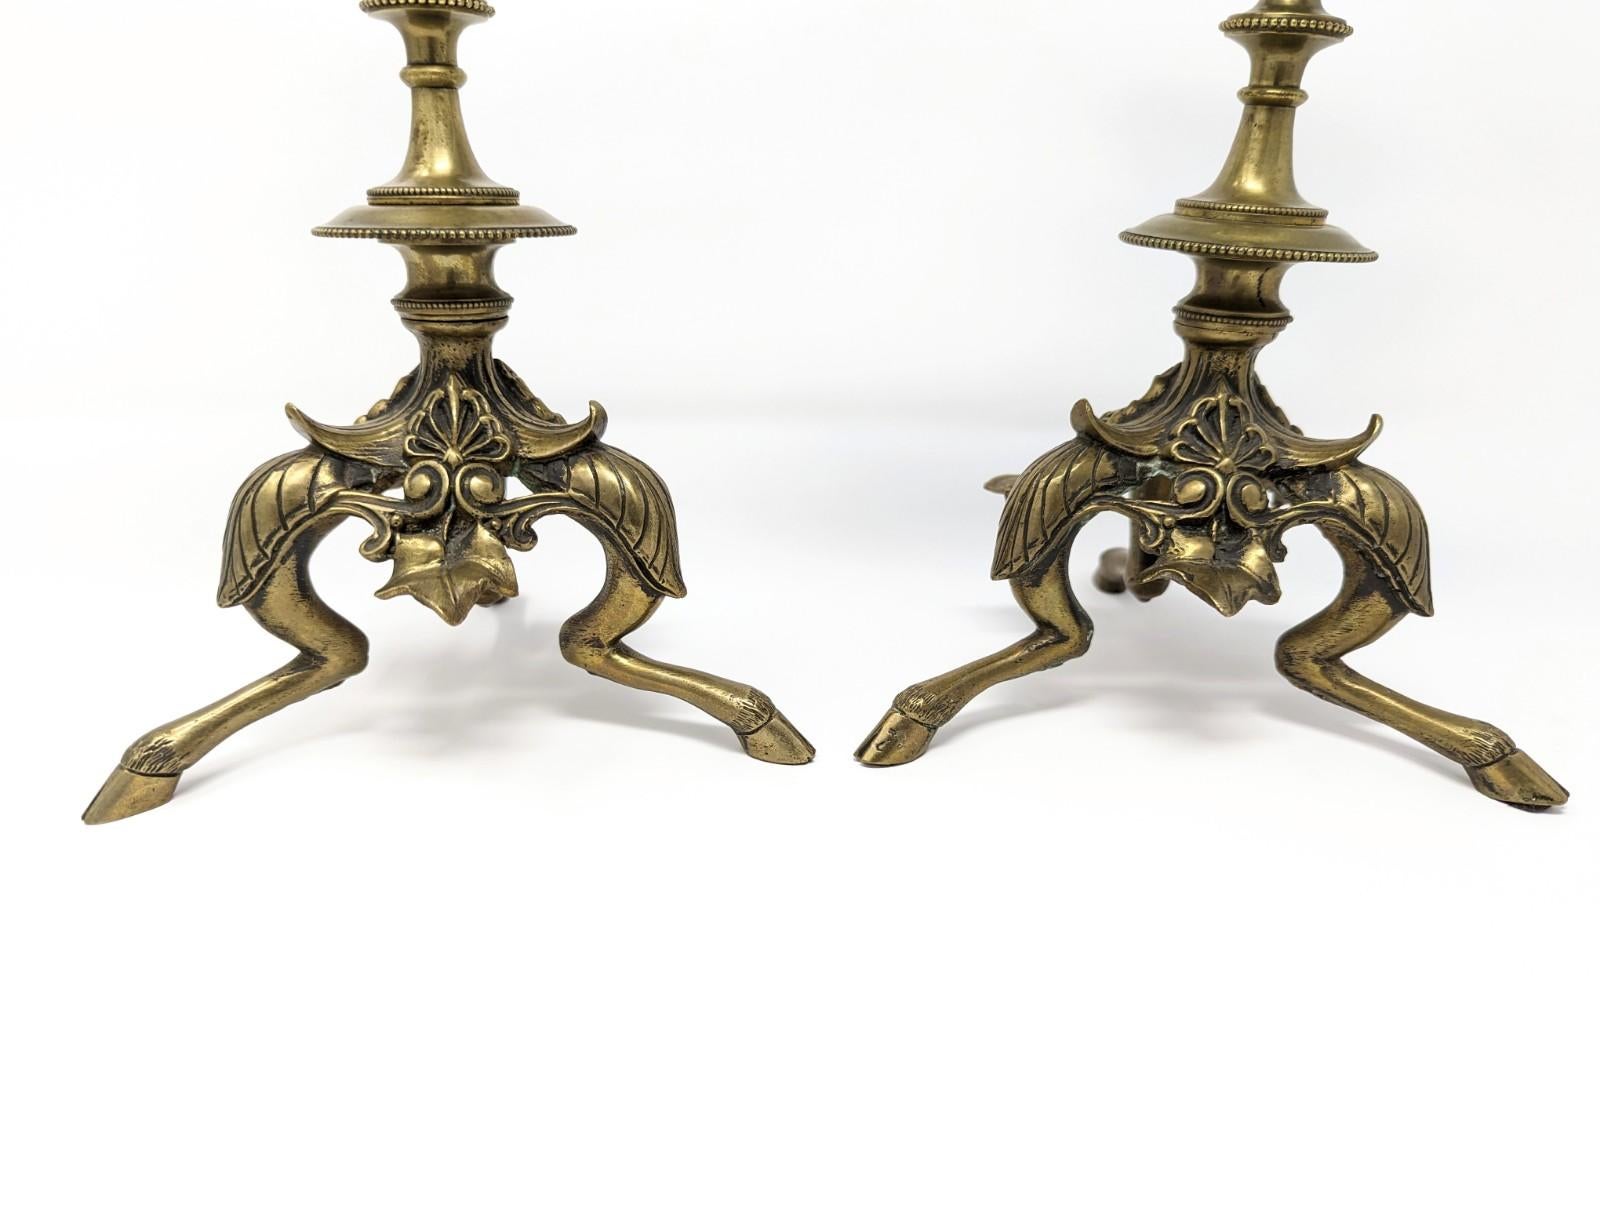 Pair of Antique Candelabras, 19th Century European Brass Candlesticks Footed For Sale 2